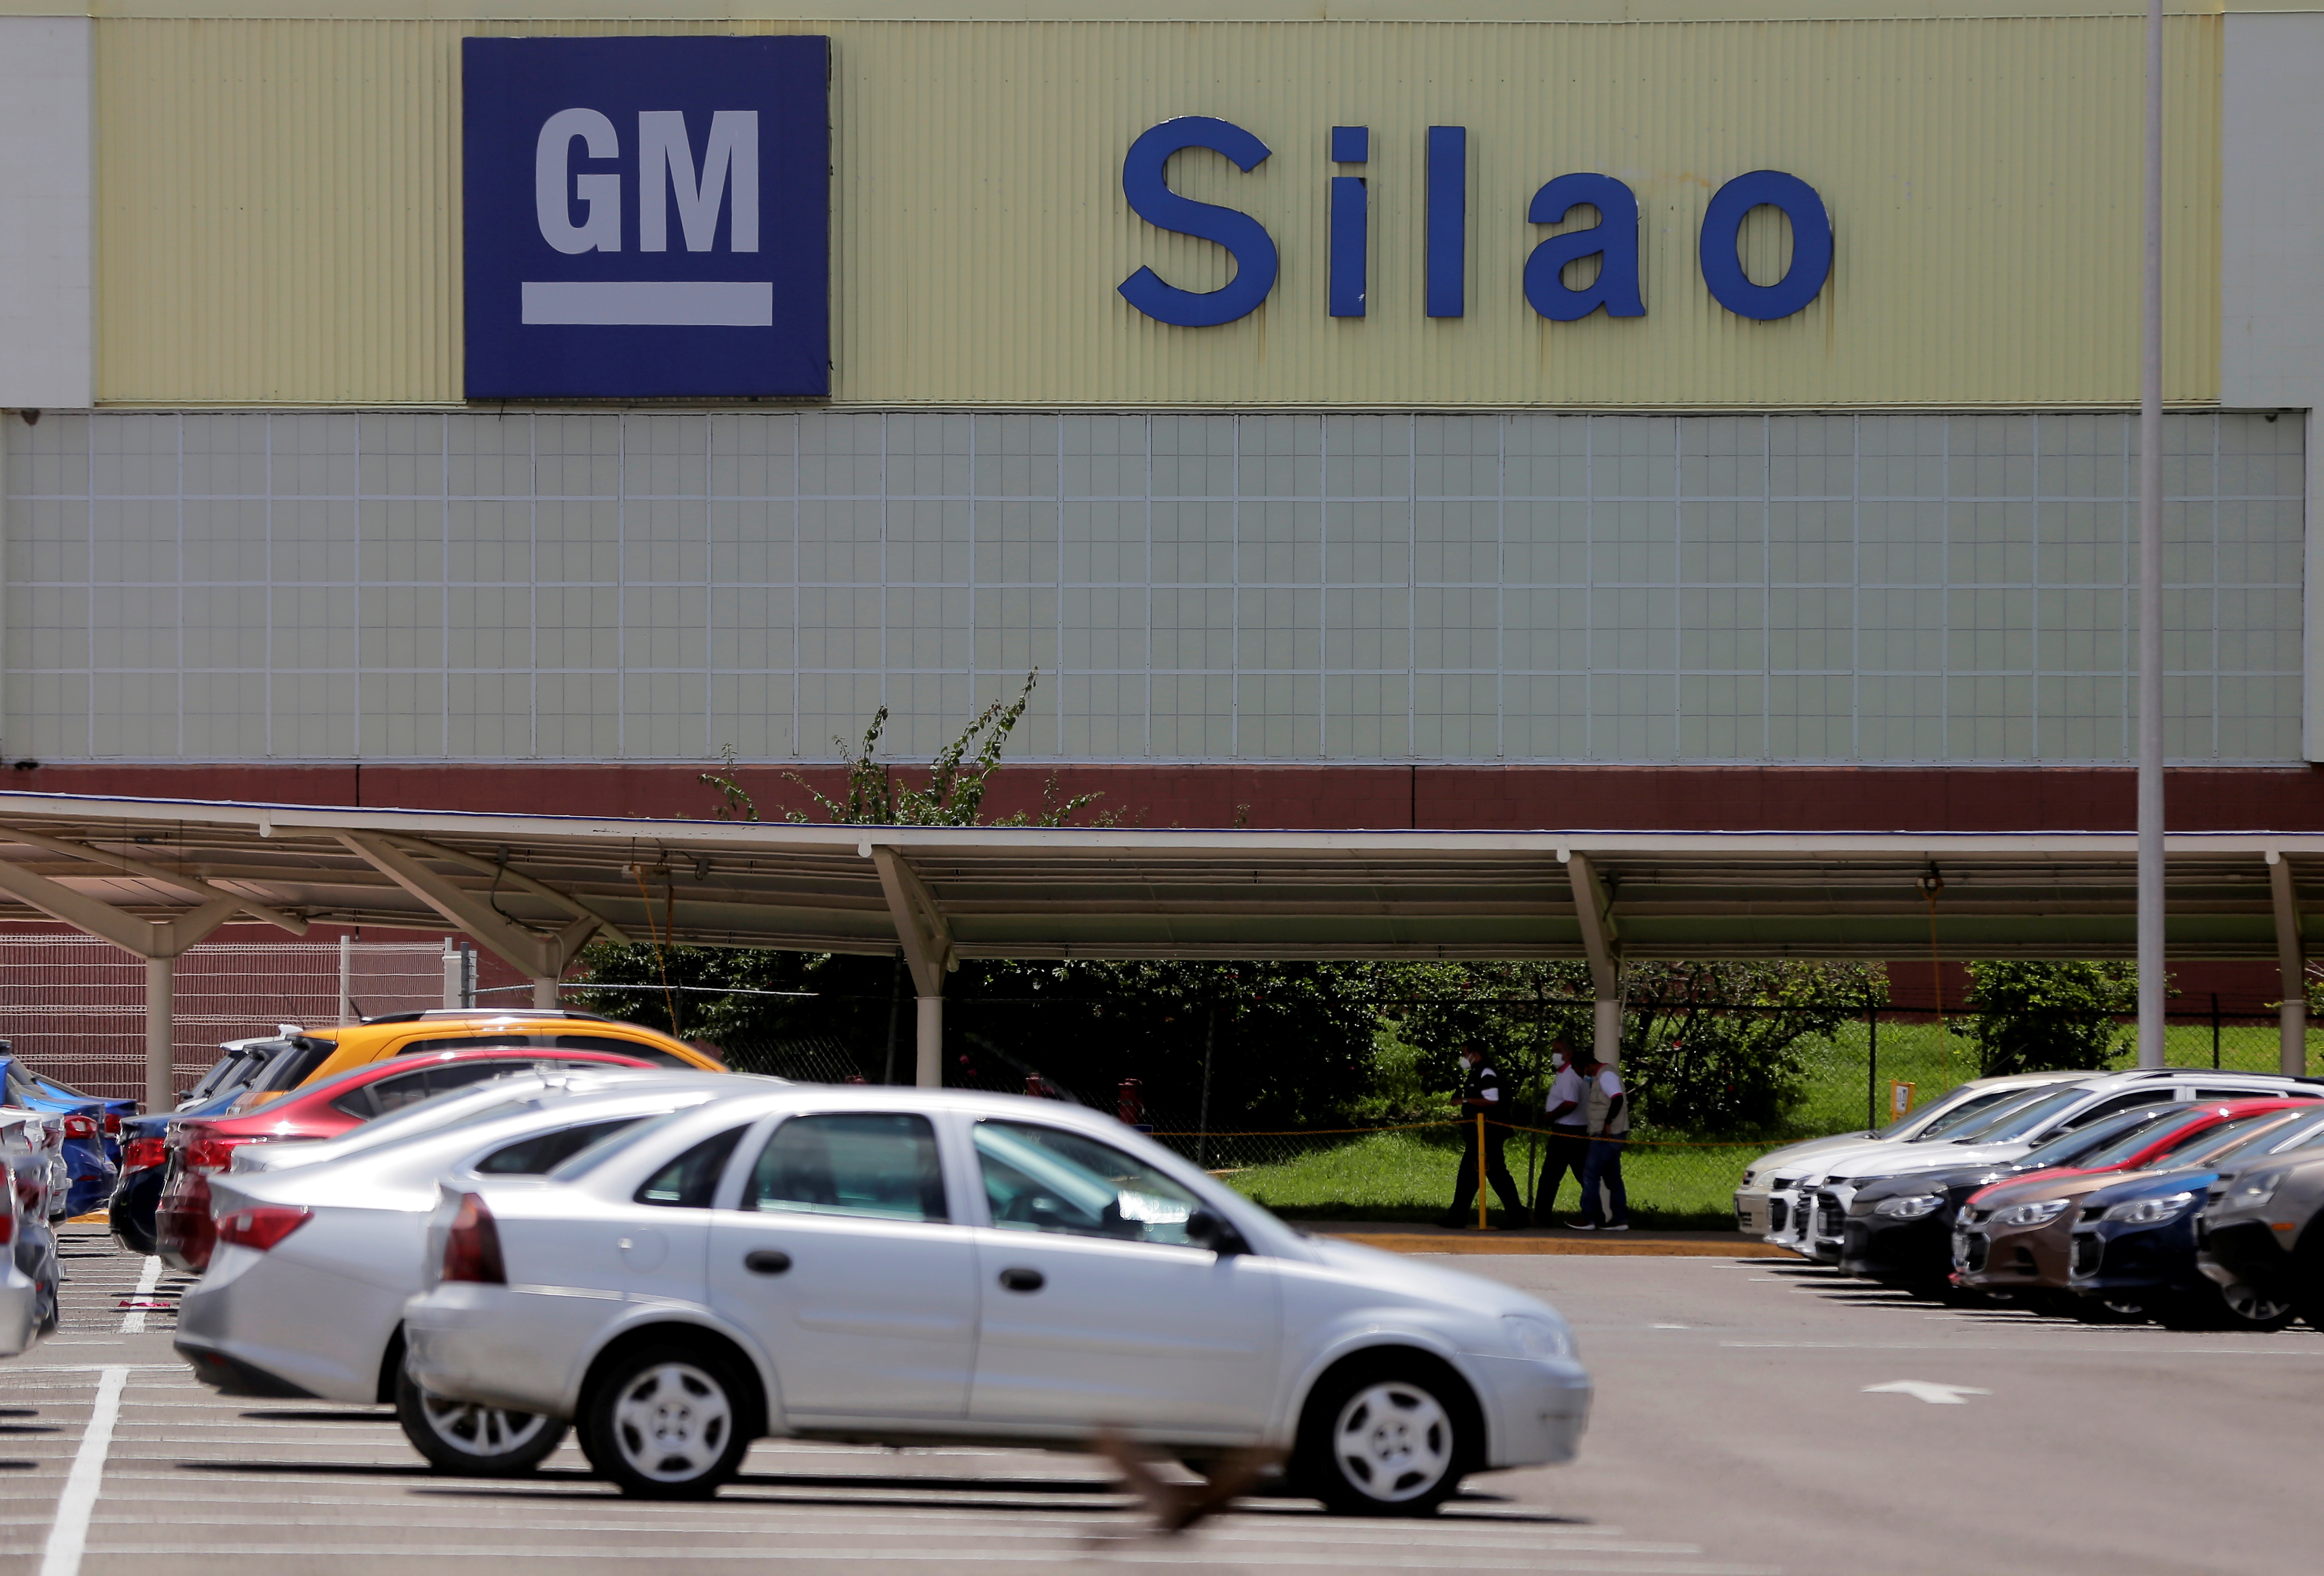 The General Motors plant is seen as its workers are to vote on whether to reject or keep the collective bargaining agreement, marking the first major test of labor rules under the United States-Mexico-Canada Agreement (USMCA), in Silao, Mexico August 17, 2021. REUTERS/Sergio Maldonado